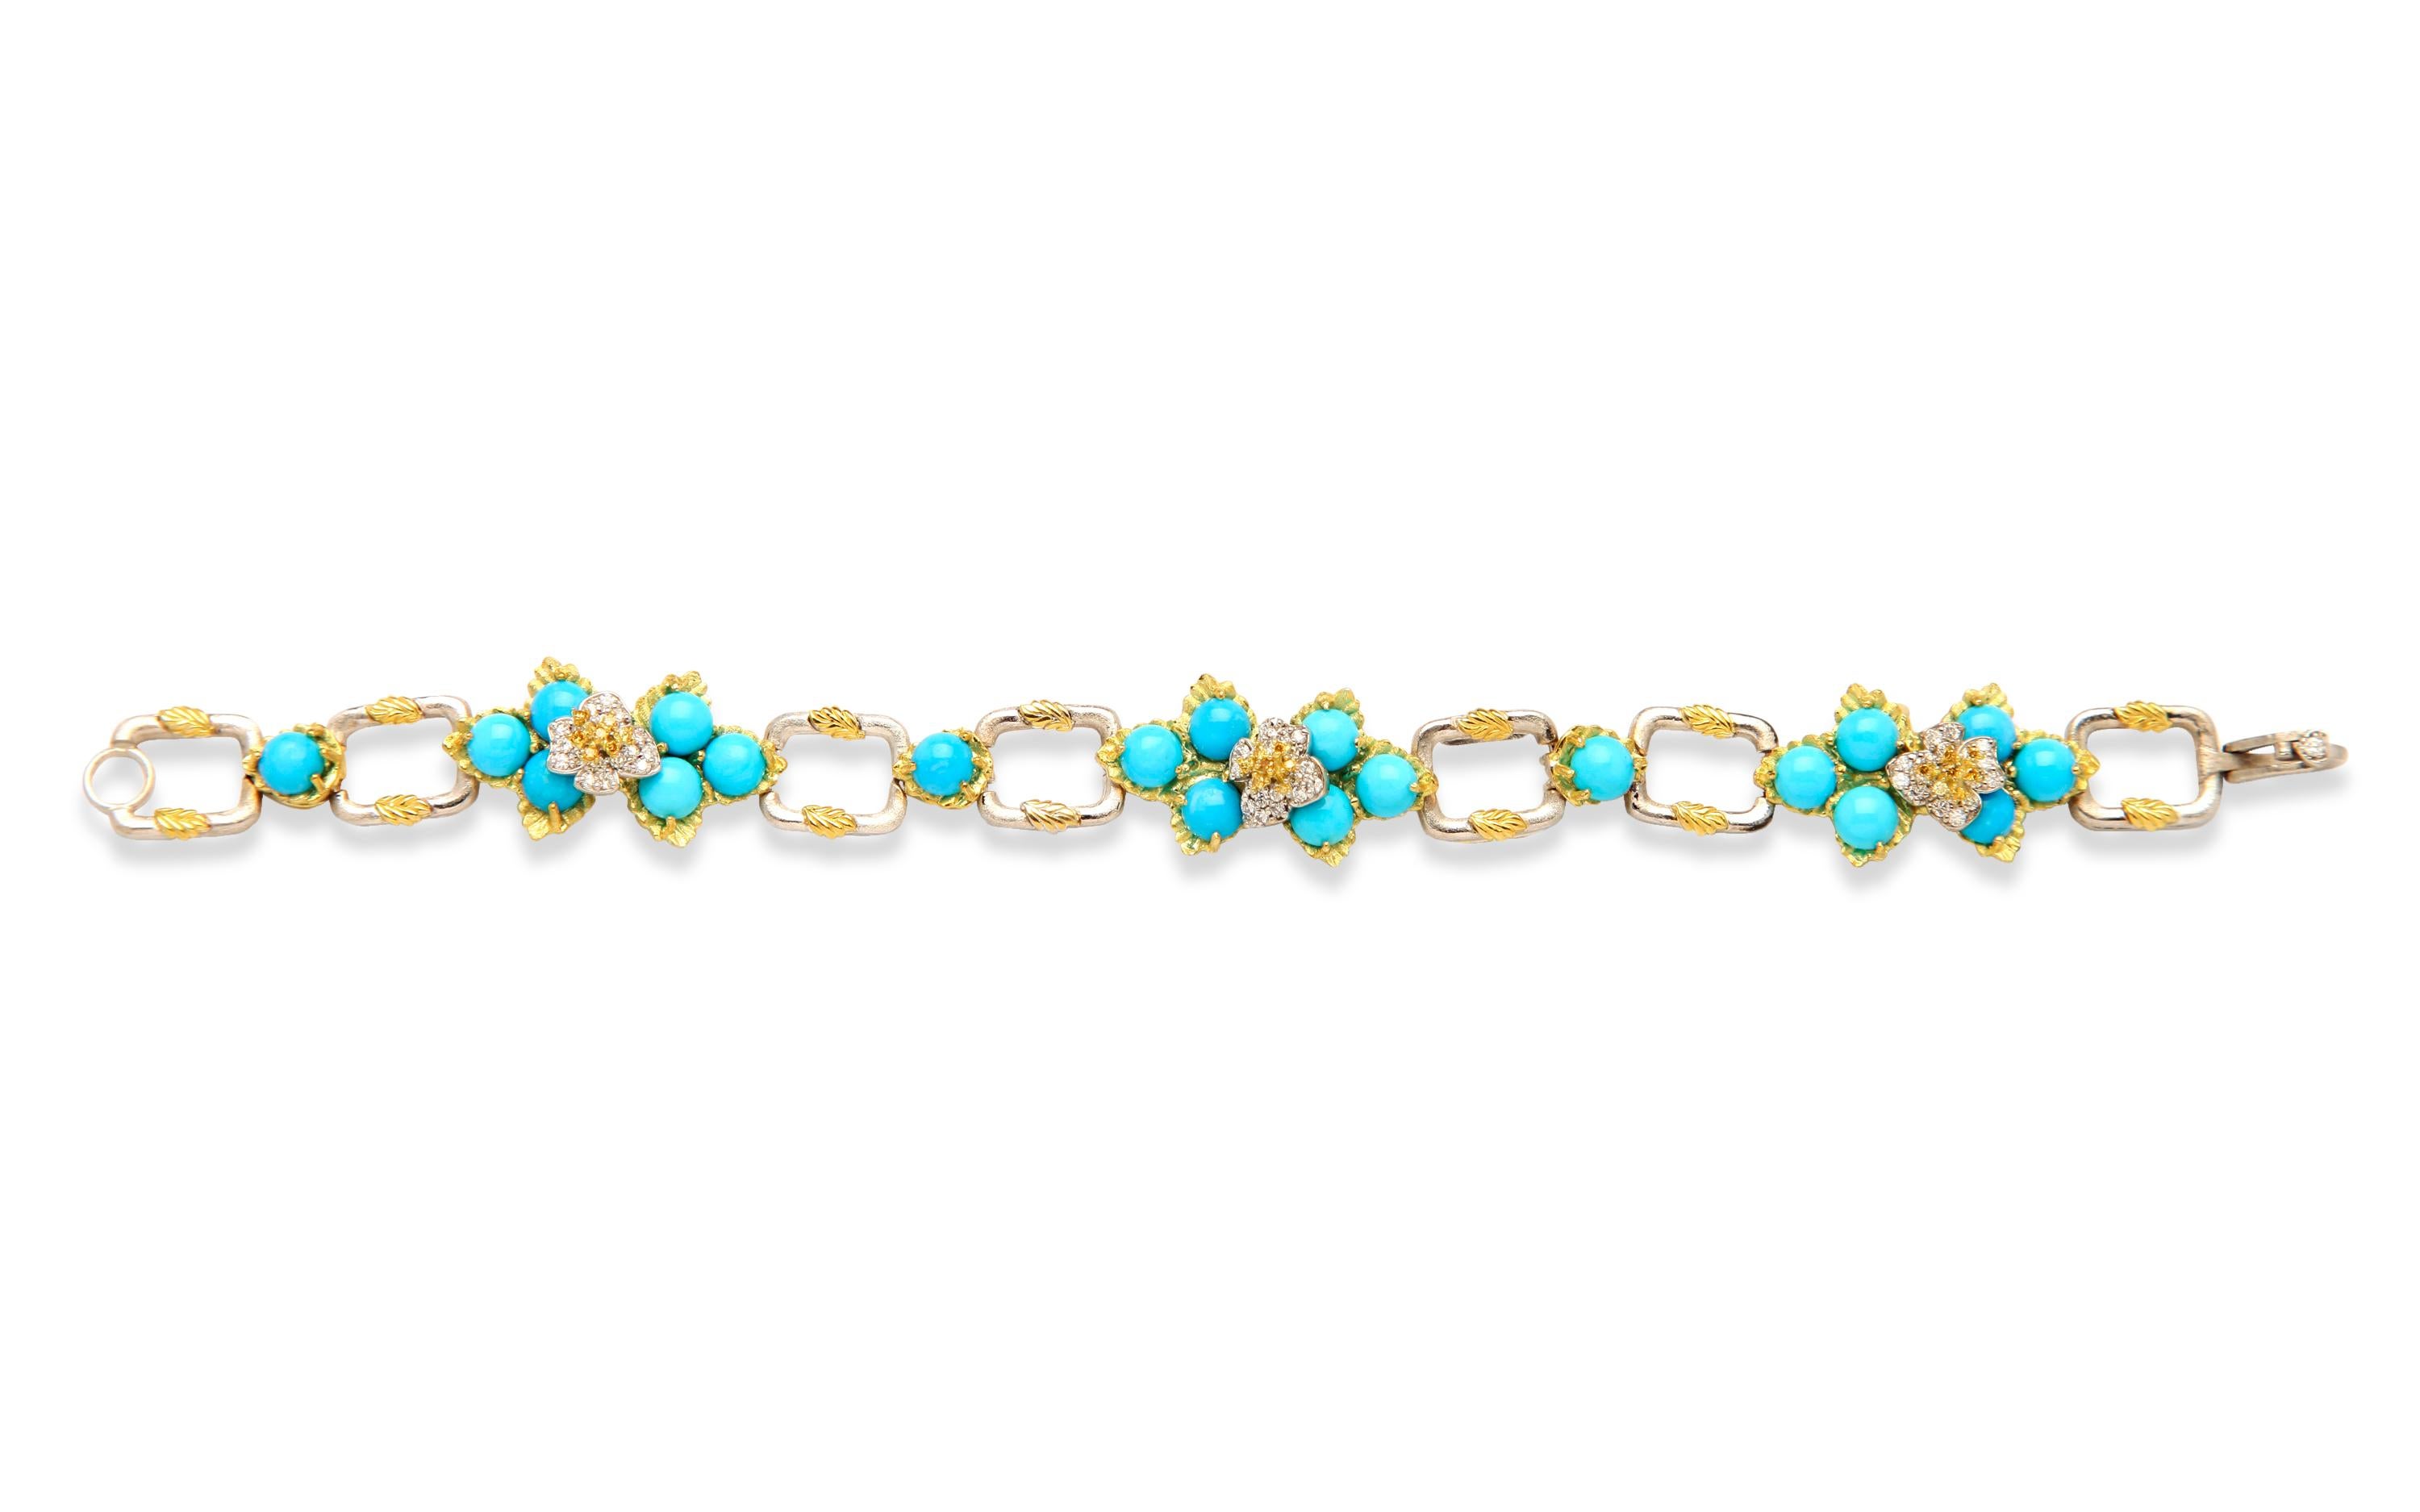 IF YOU ARE REALLY INTERESTED, CONTACT US WITH ANY REASONABLE OFFER. WE WILL TRY OUR BEST TO MAKE YOU HAPPY!

18K Yellow and White Two-Tone Gold Bracelet with White and Yellow Diamonds and Sleeping Beauty Turquoise

This state-of-the-art bracelet is